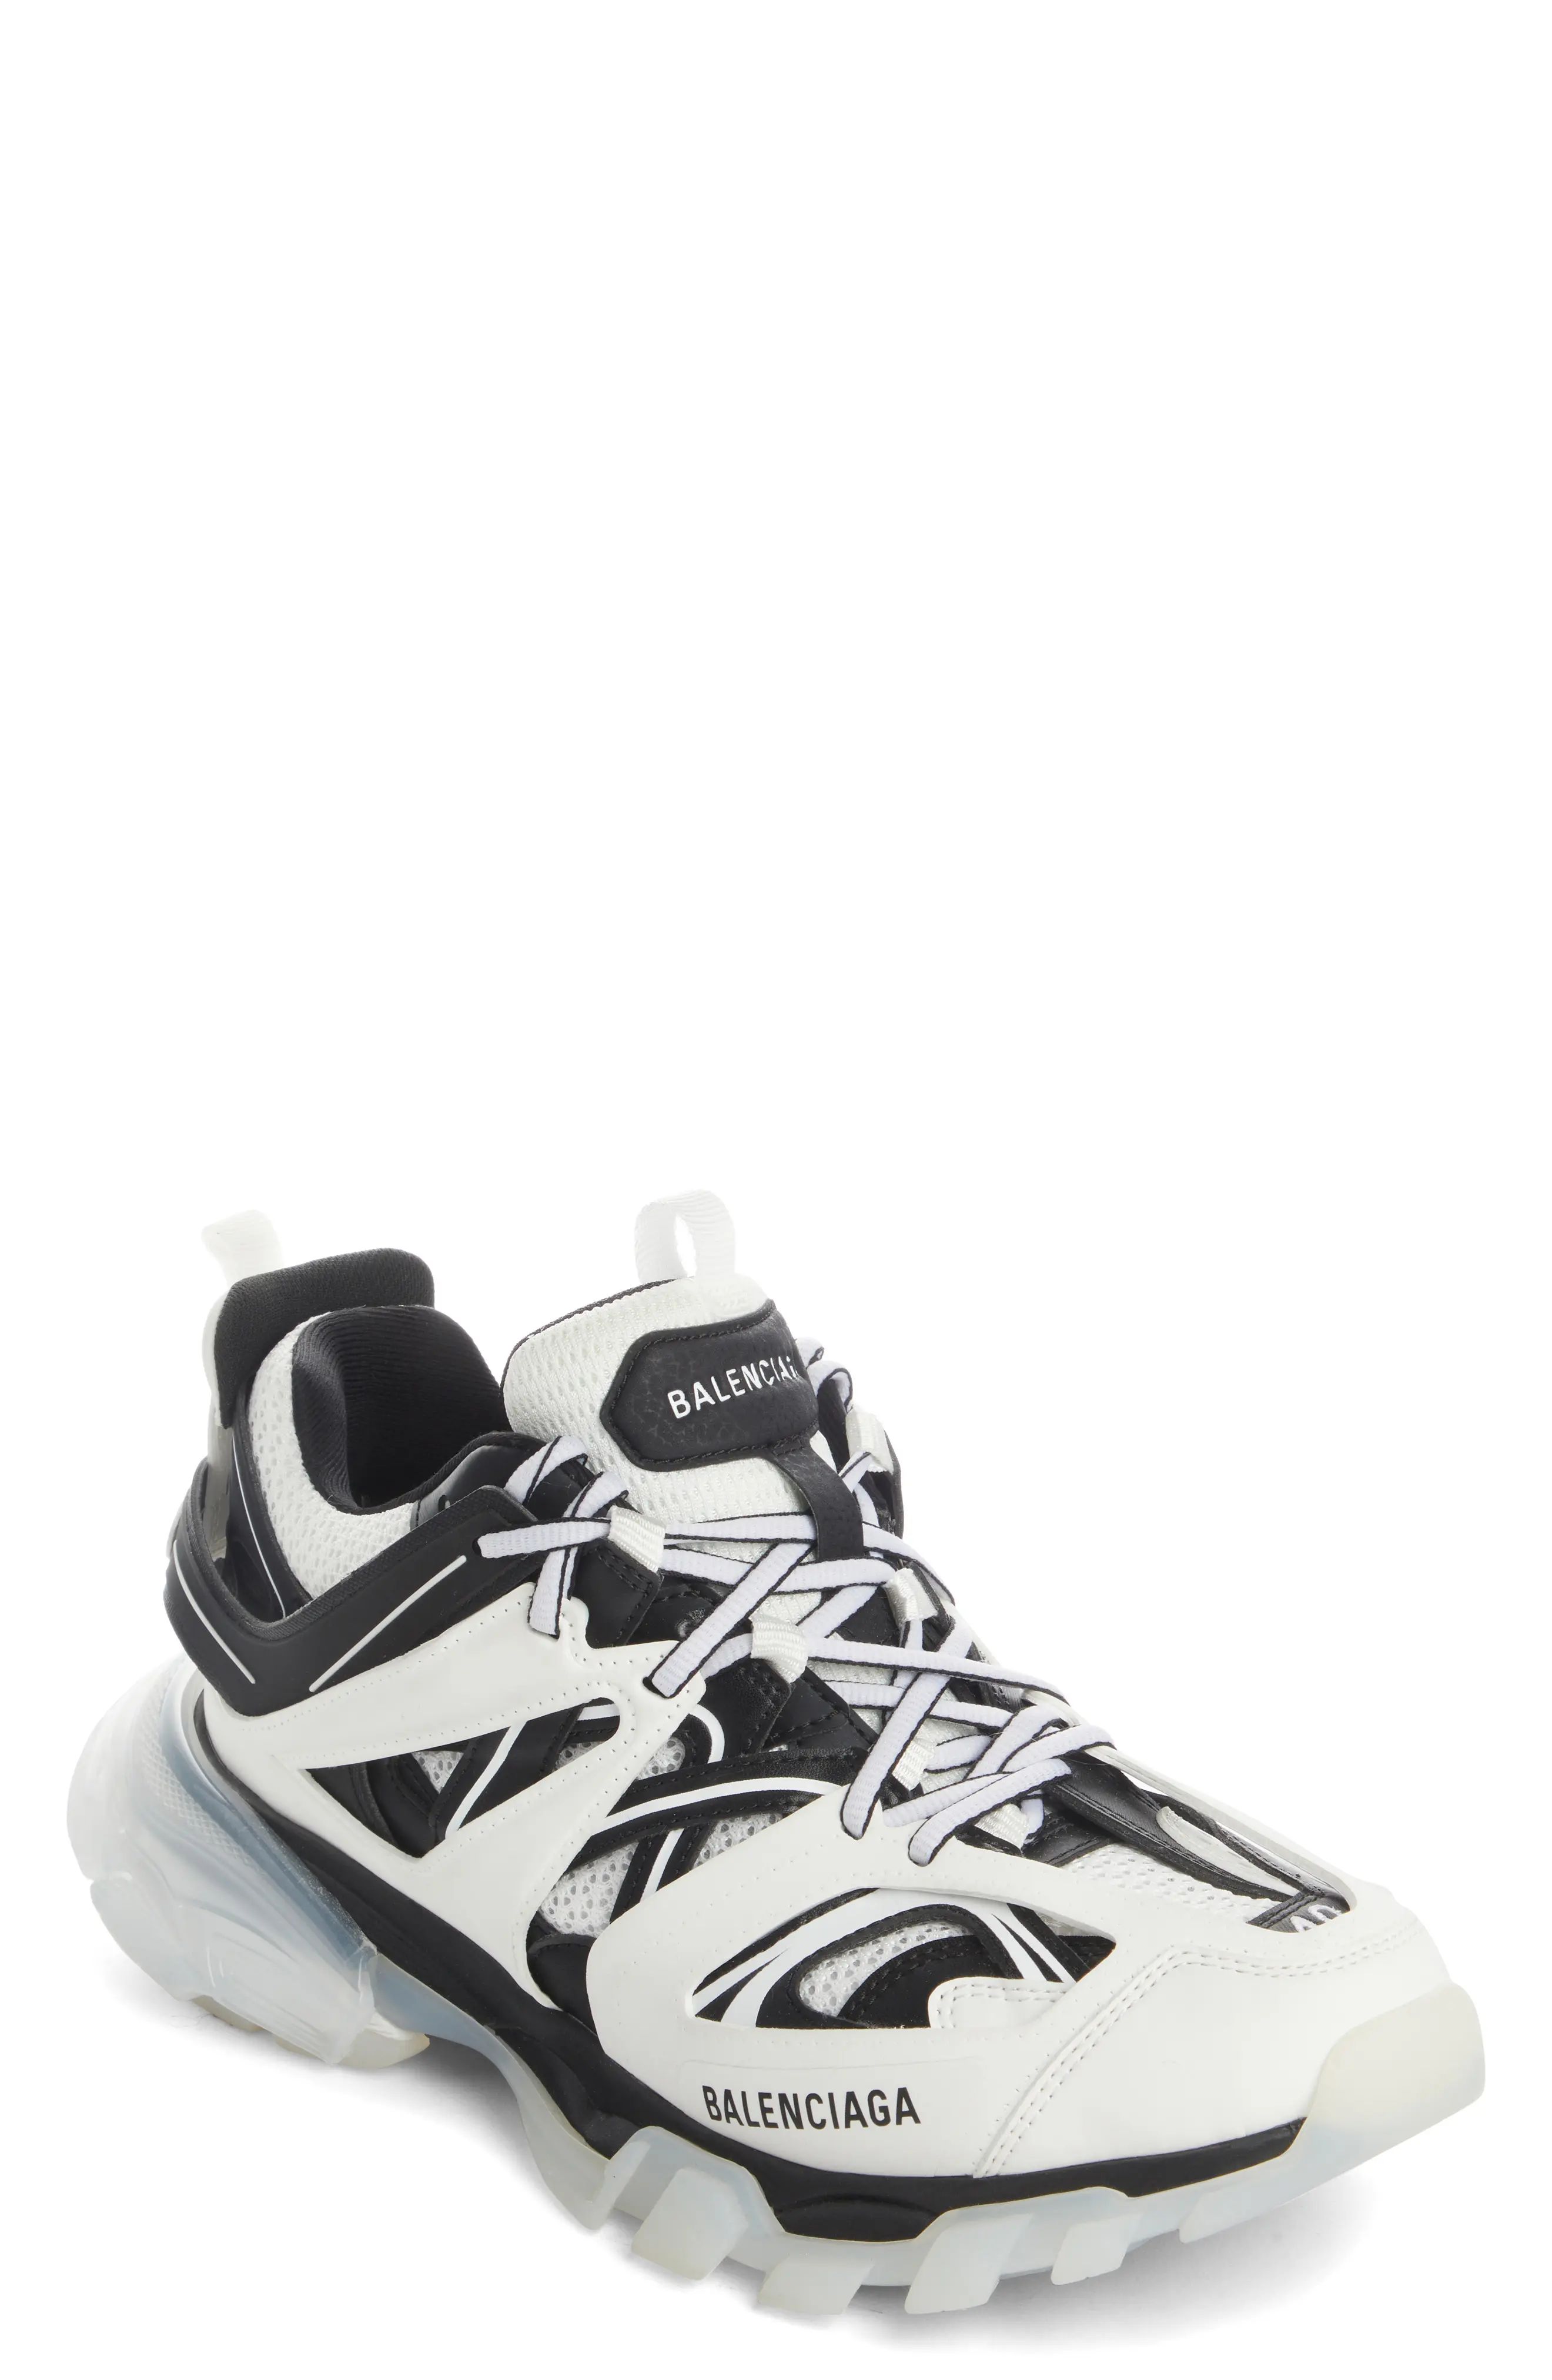 Balenciaga Track Bicolor Clear Sole Sneaker, Size 11Us in White/Black at Nordstrom | Nordstrom